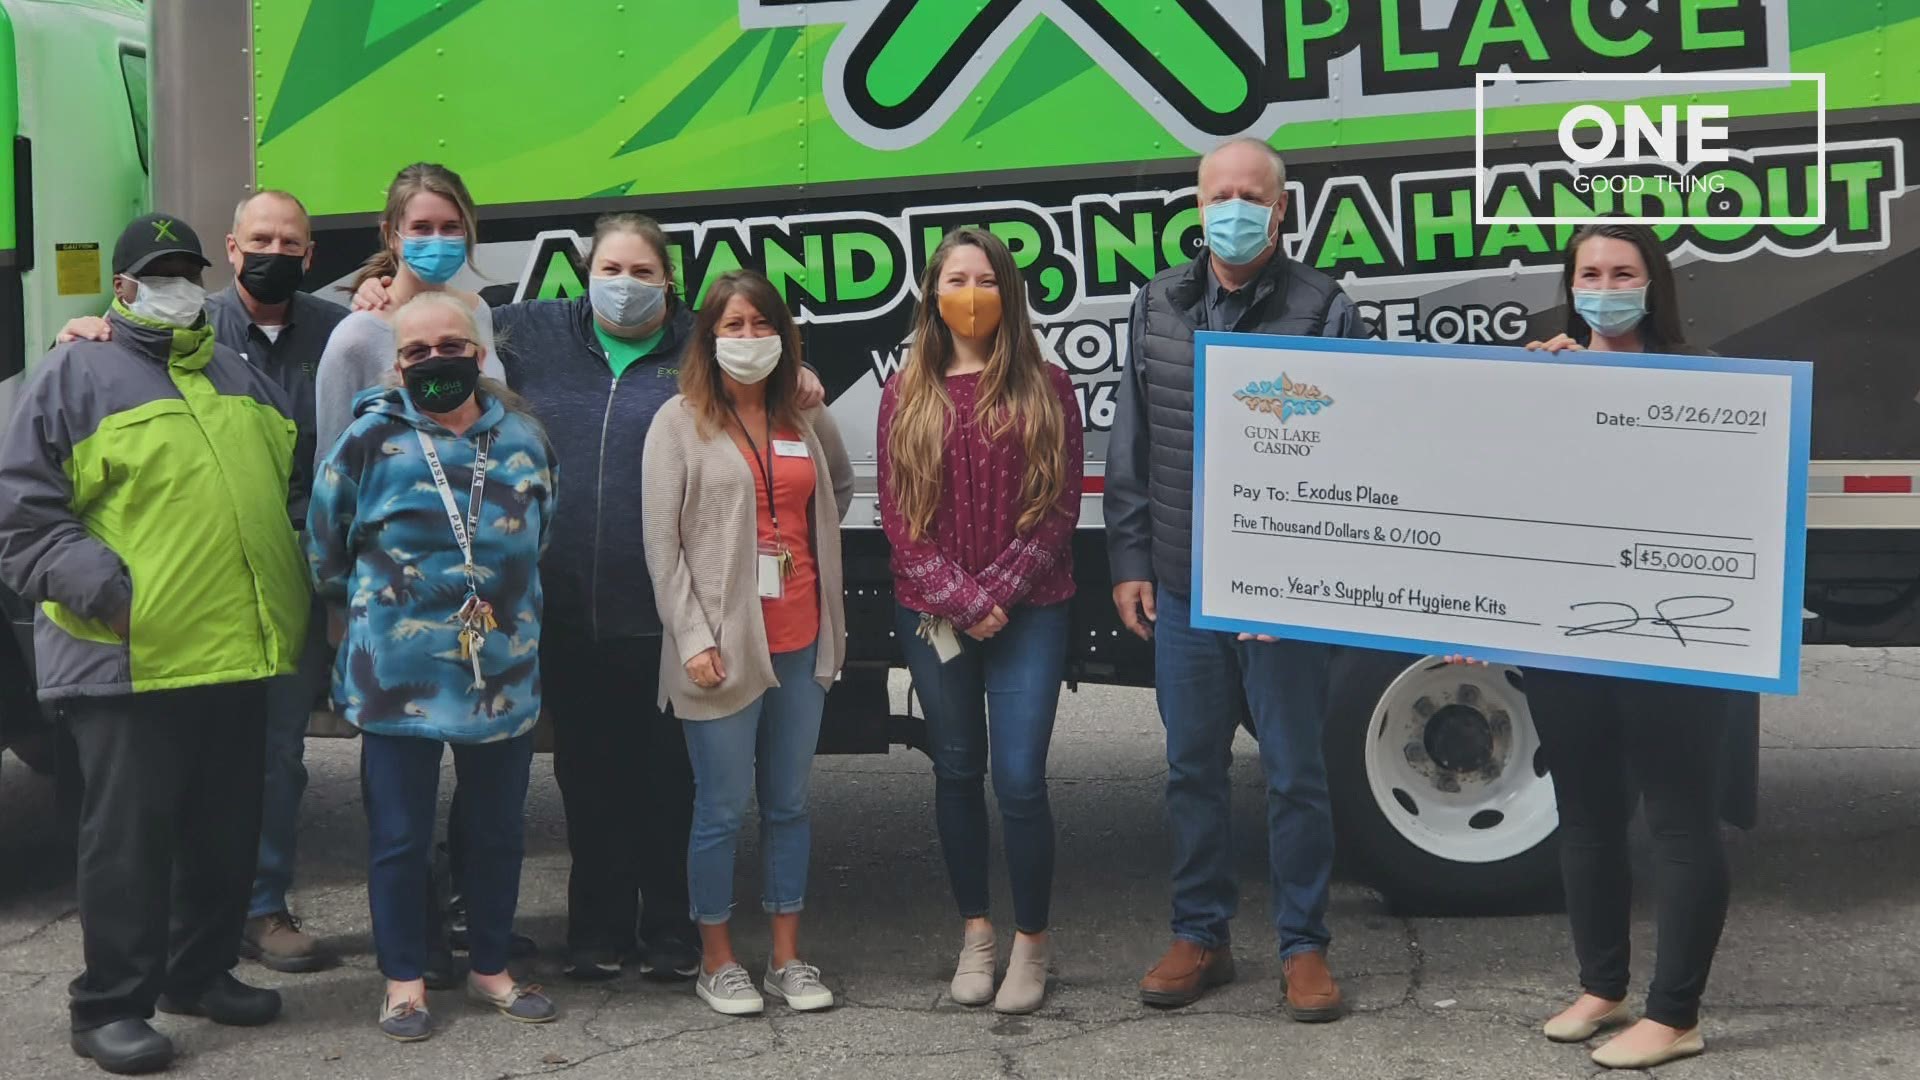 Gun Lake Casino recently donated $5,000 to Exodus Place. The facility will use the donation to help buy personal hygiene kits for the homeless.